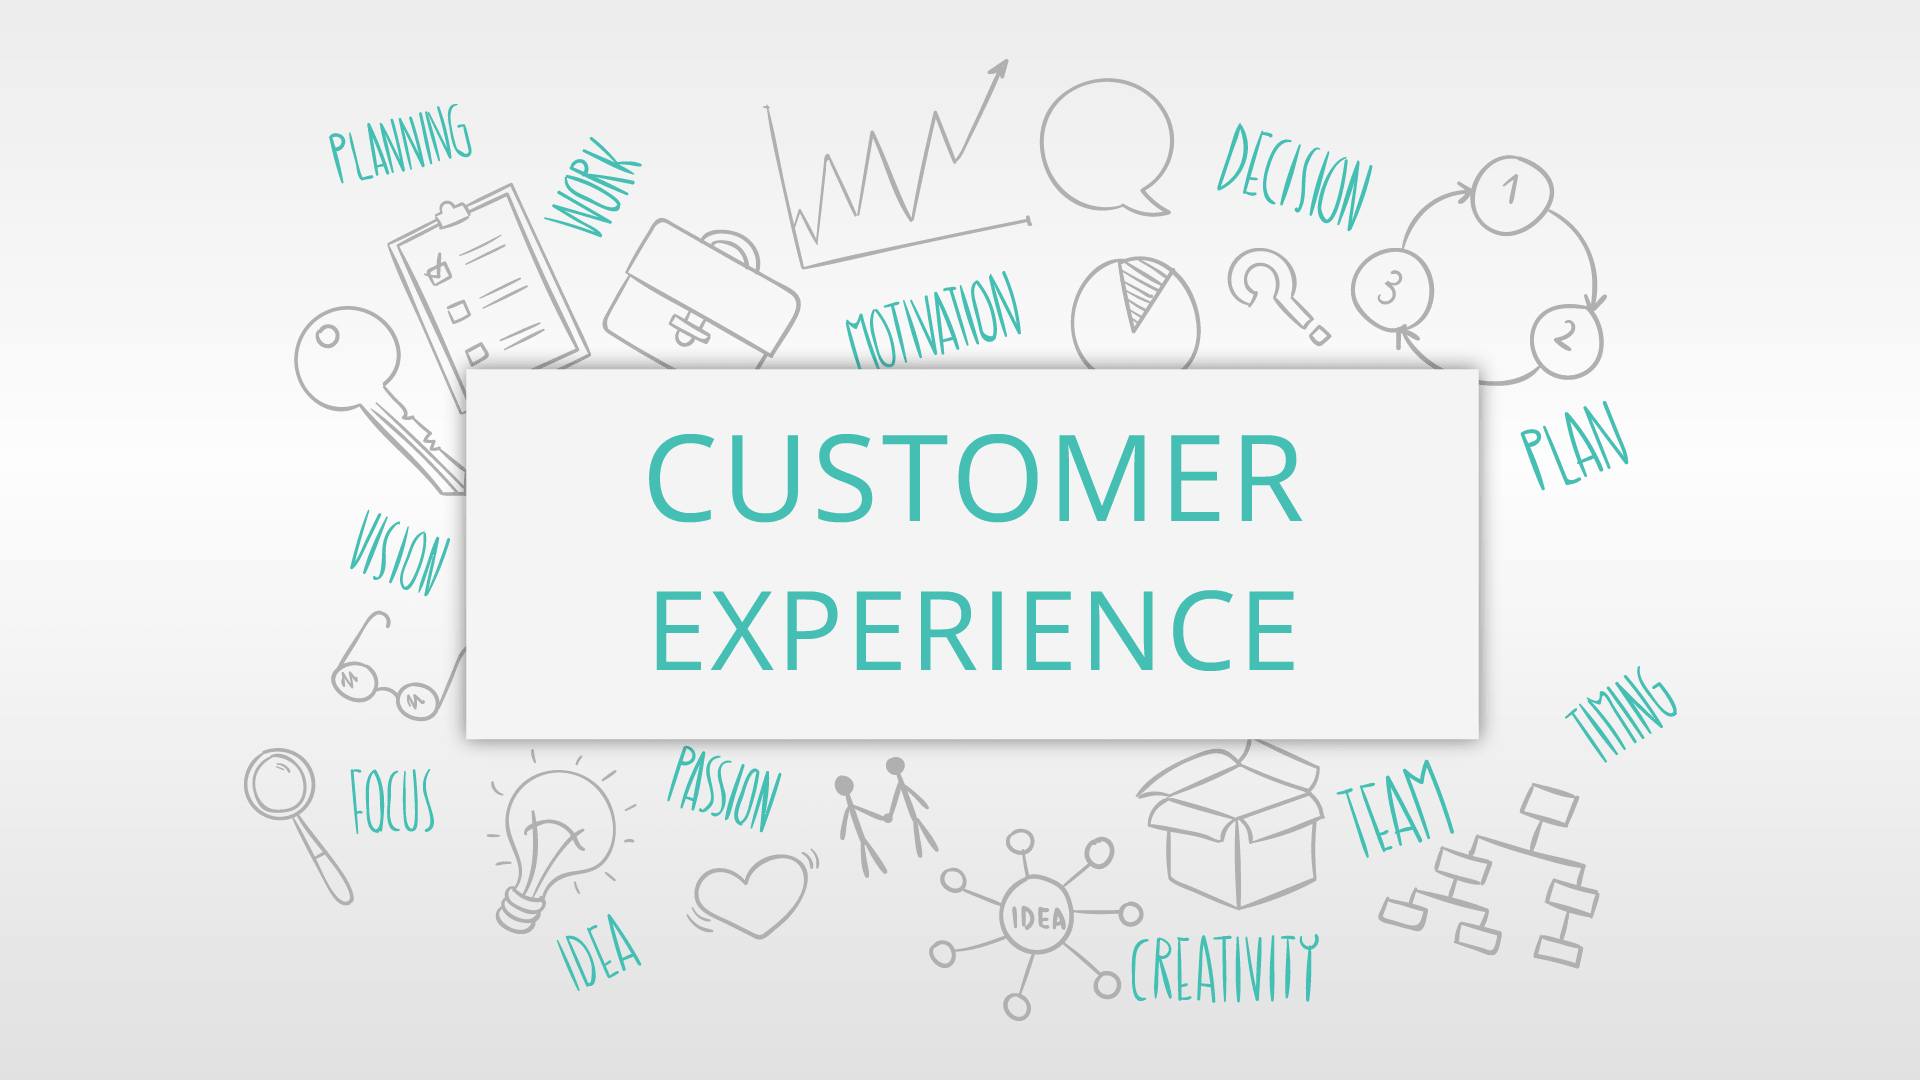 Customer Experience: The Road to a Great Customer Journey